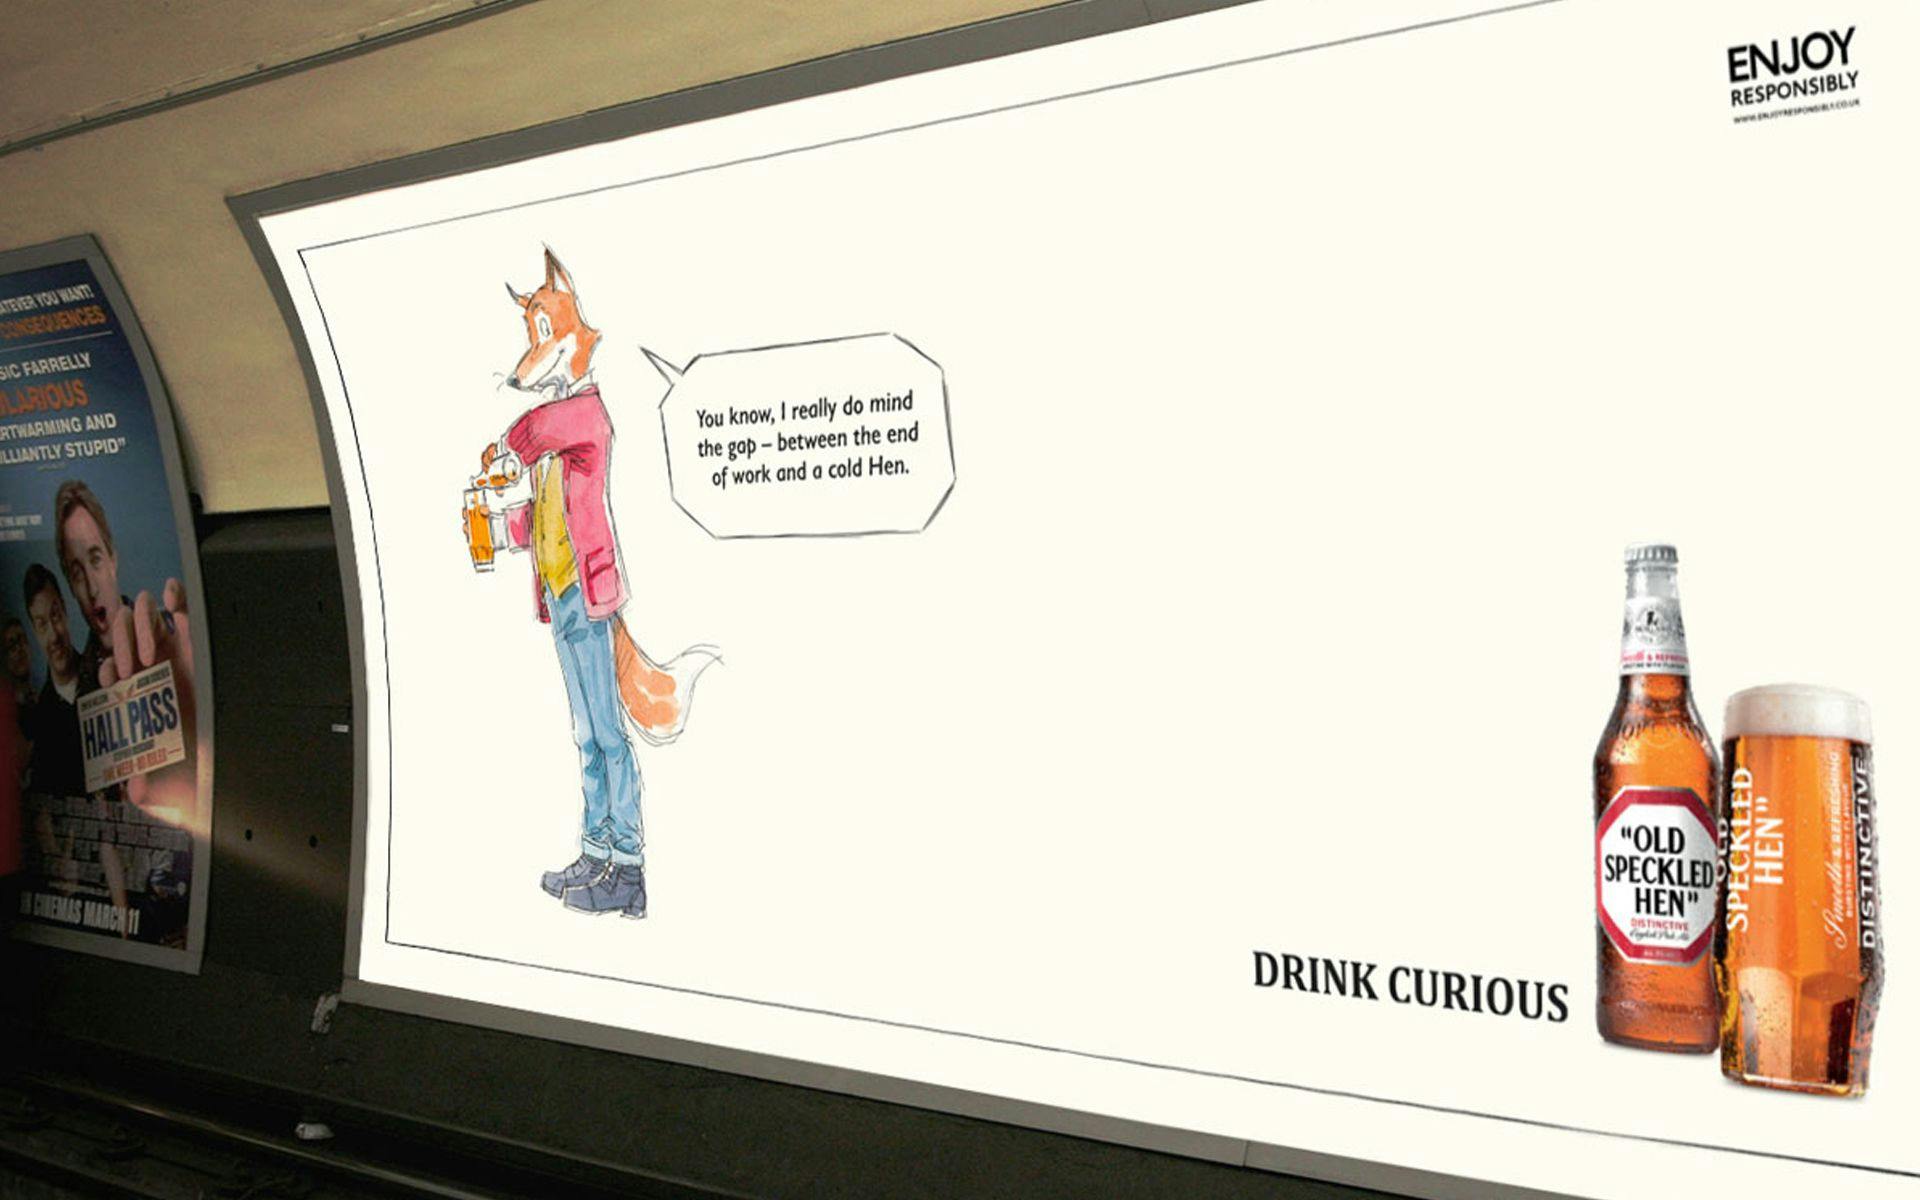 DRINK CURIOUS